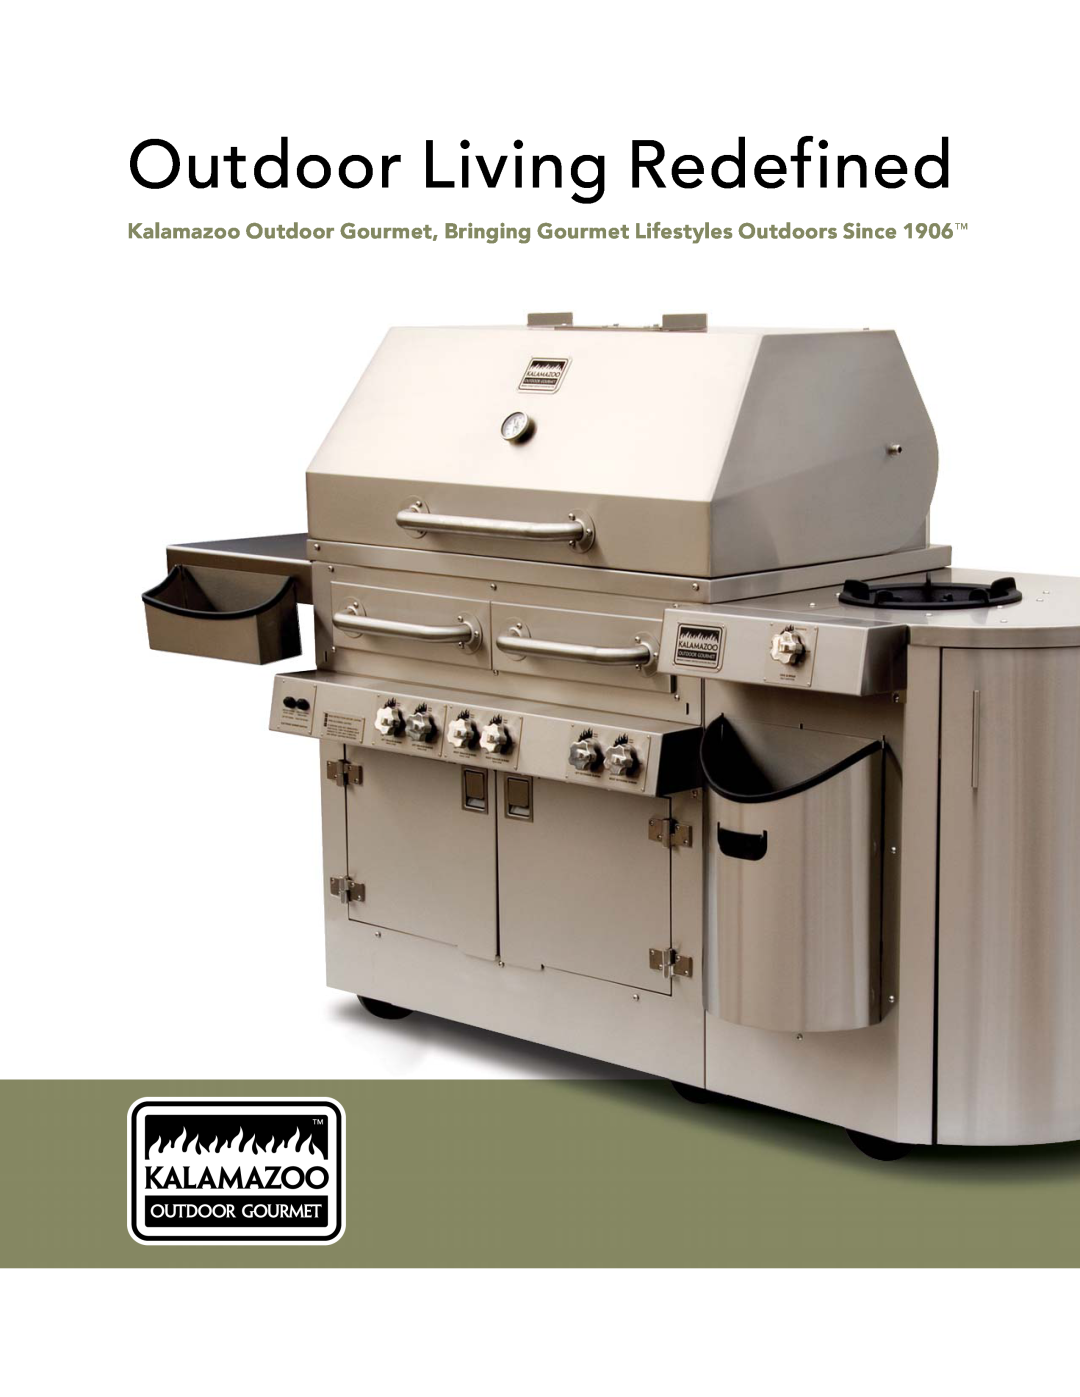 Kalamazoo Outdoor Gourmet Grill manual Outdoor Living Redefined 